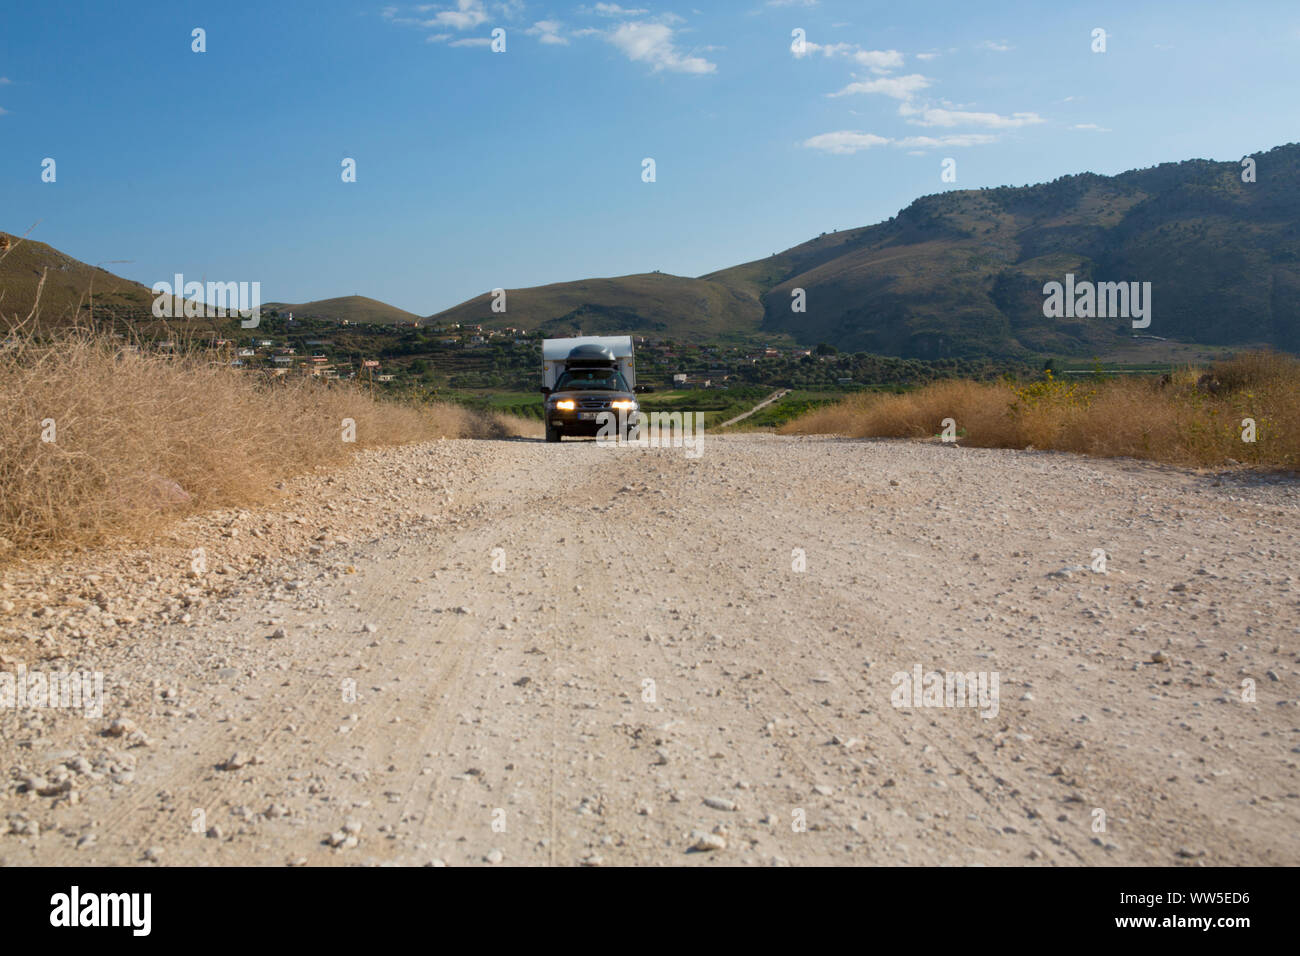 Saab with caravan driving on stony street in remote area Stock Photo